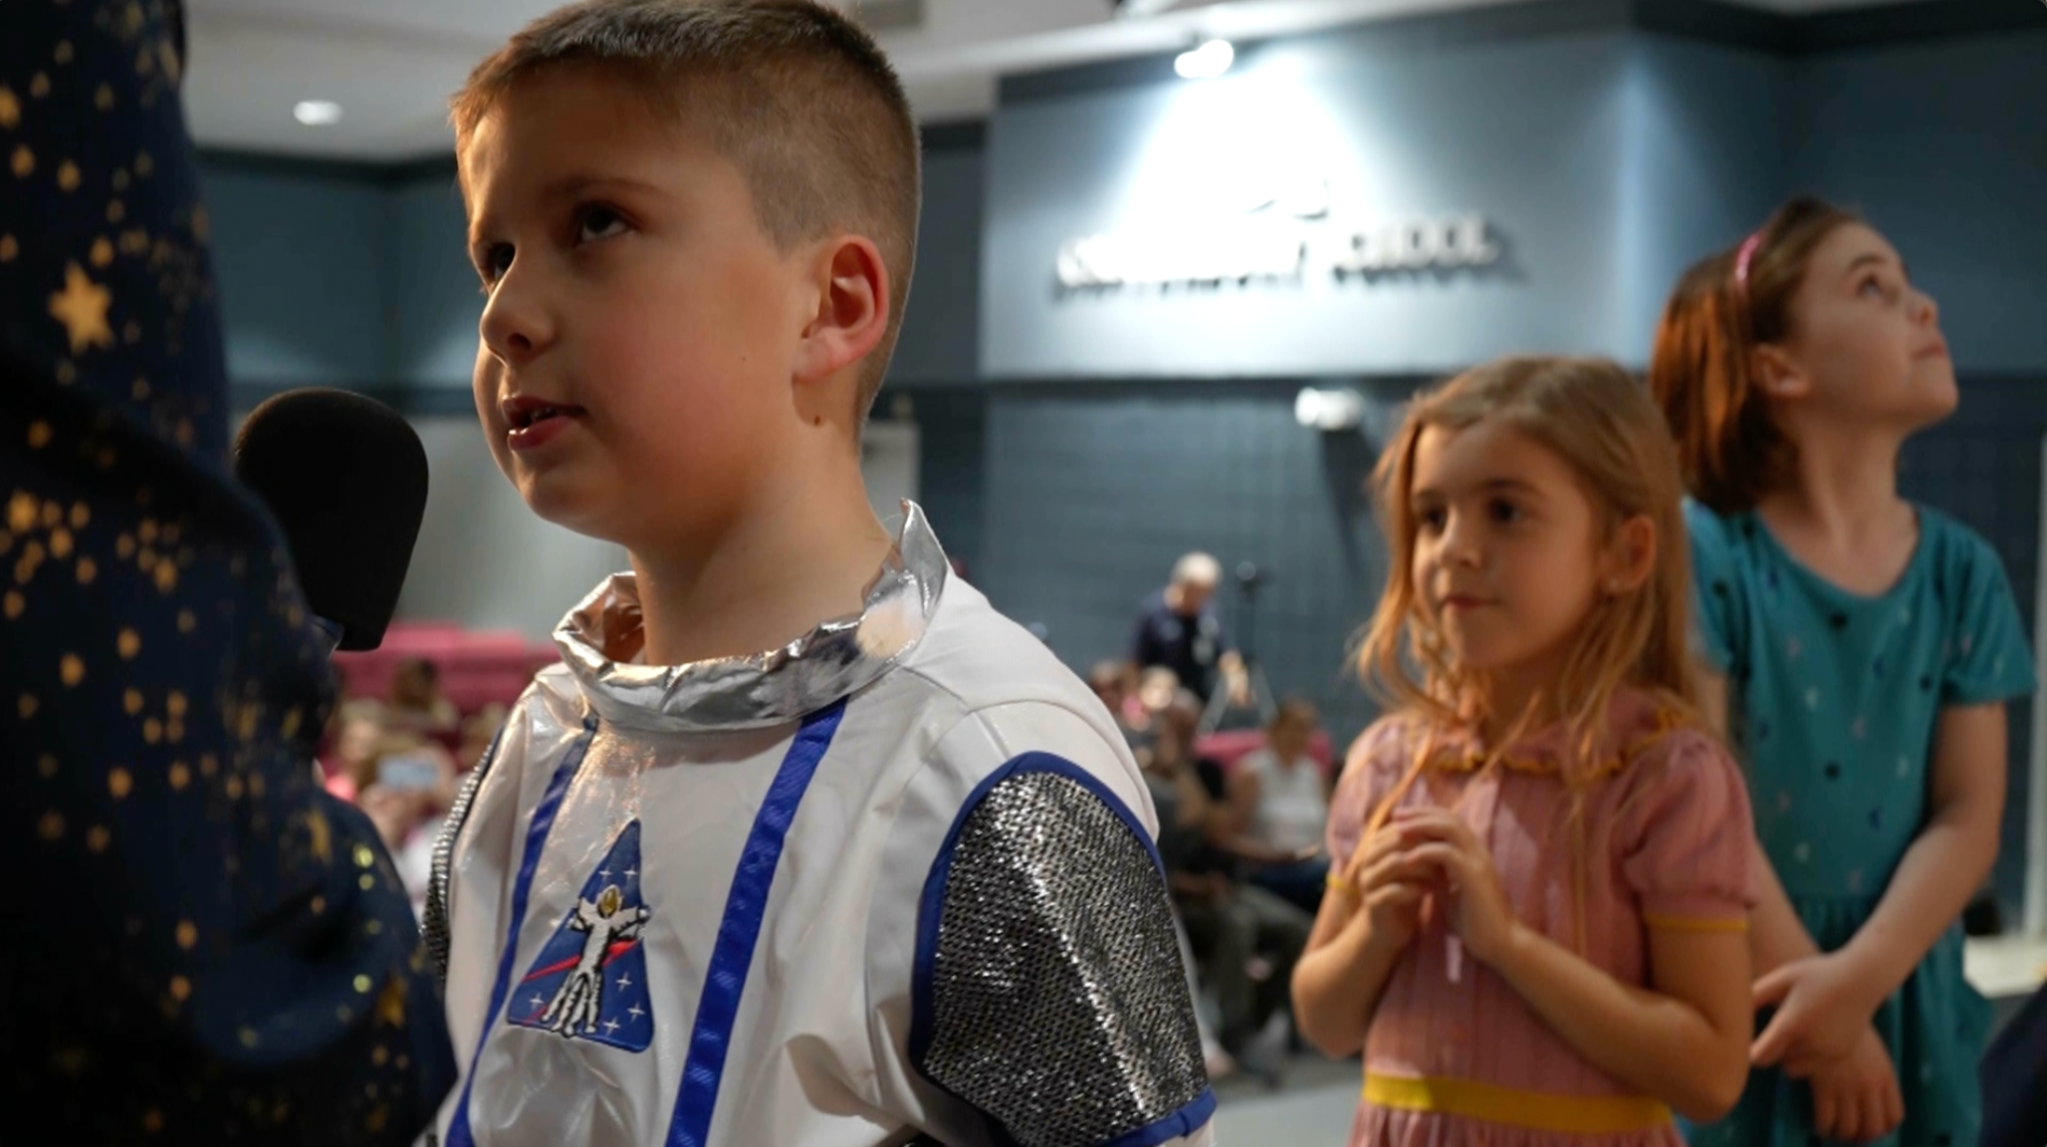 Student Isaac Deeter, wearing an astronaut costume, speaks into a microphone. Samantha Pezzi, wearing a pink dress, her hands in front of her, waits behind him and a student in a blue dress stands behind her. The school auditorium is blurred in the background.